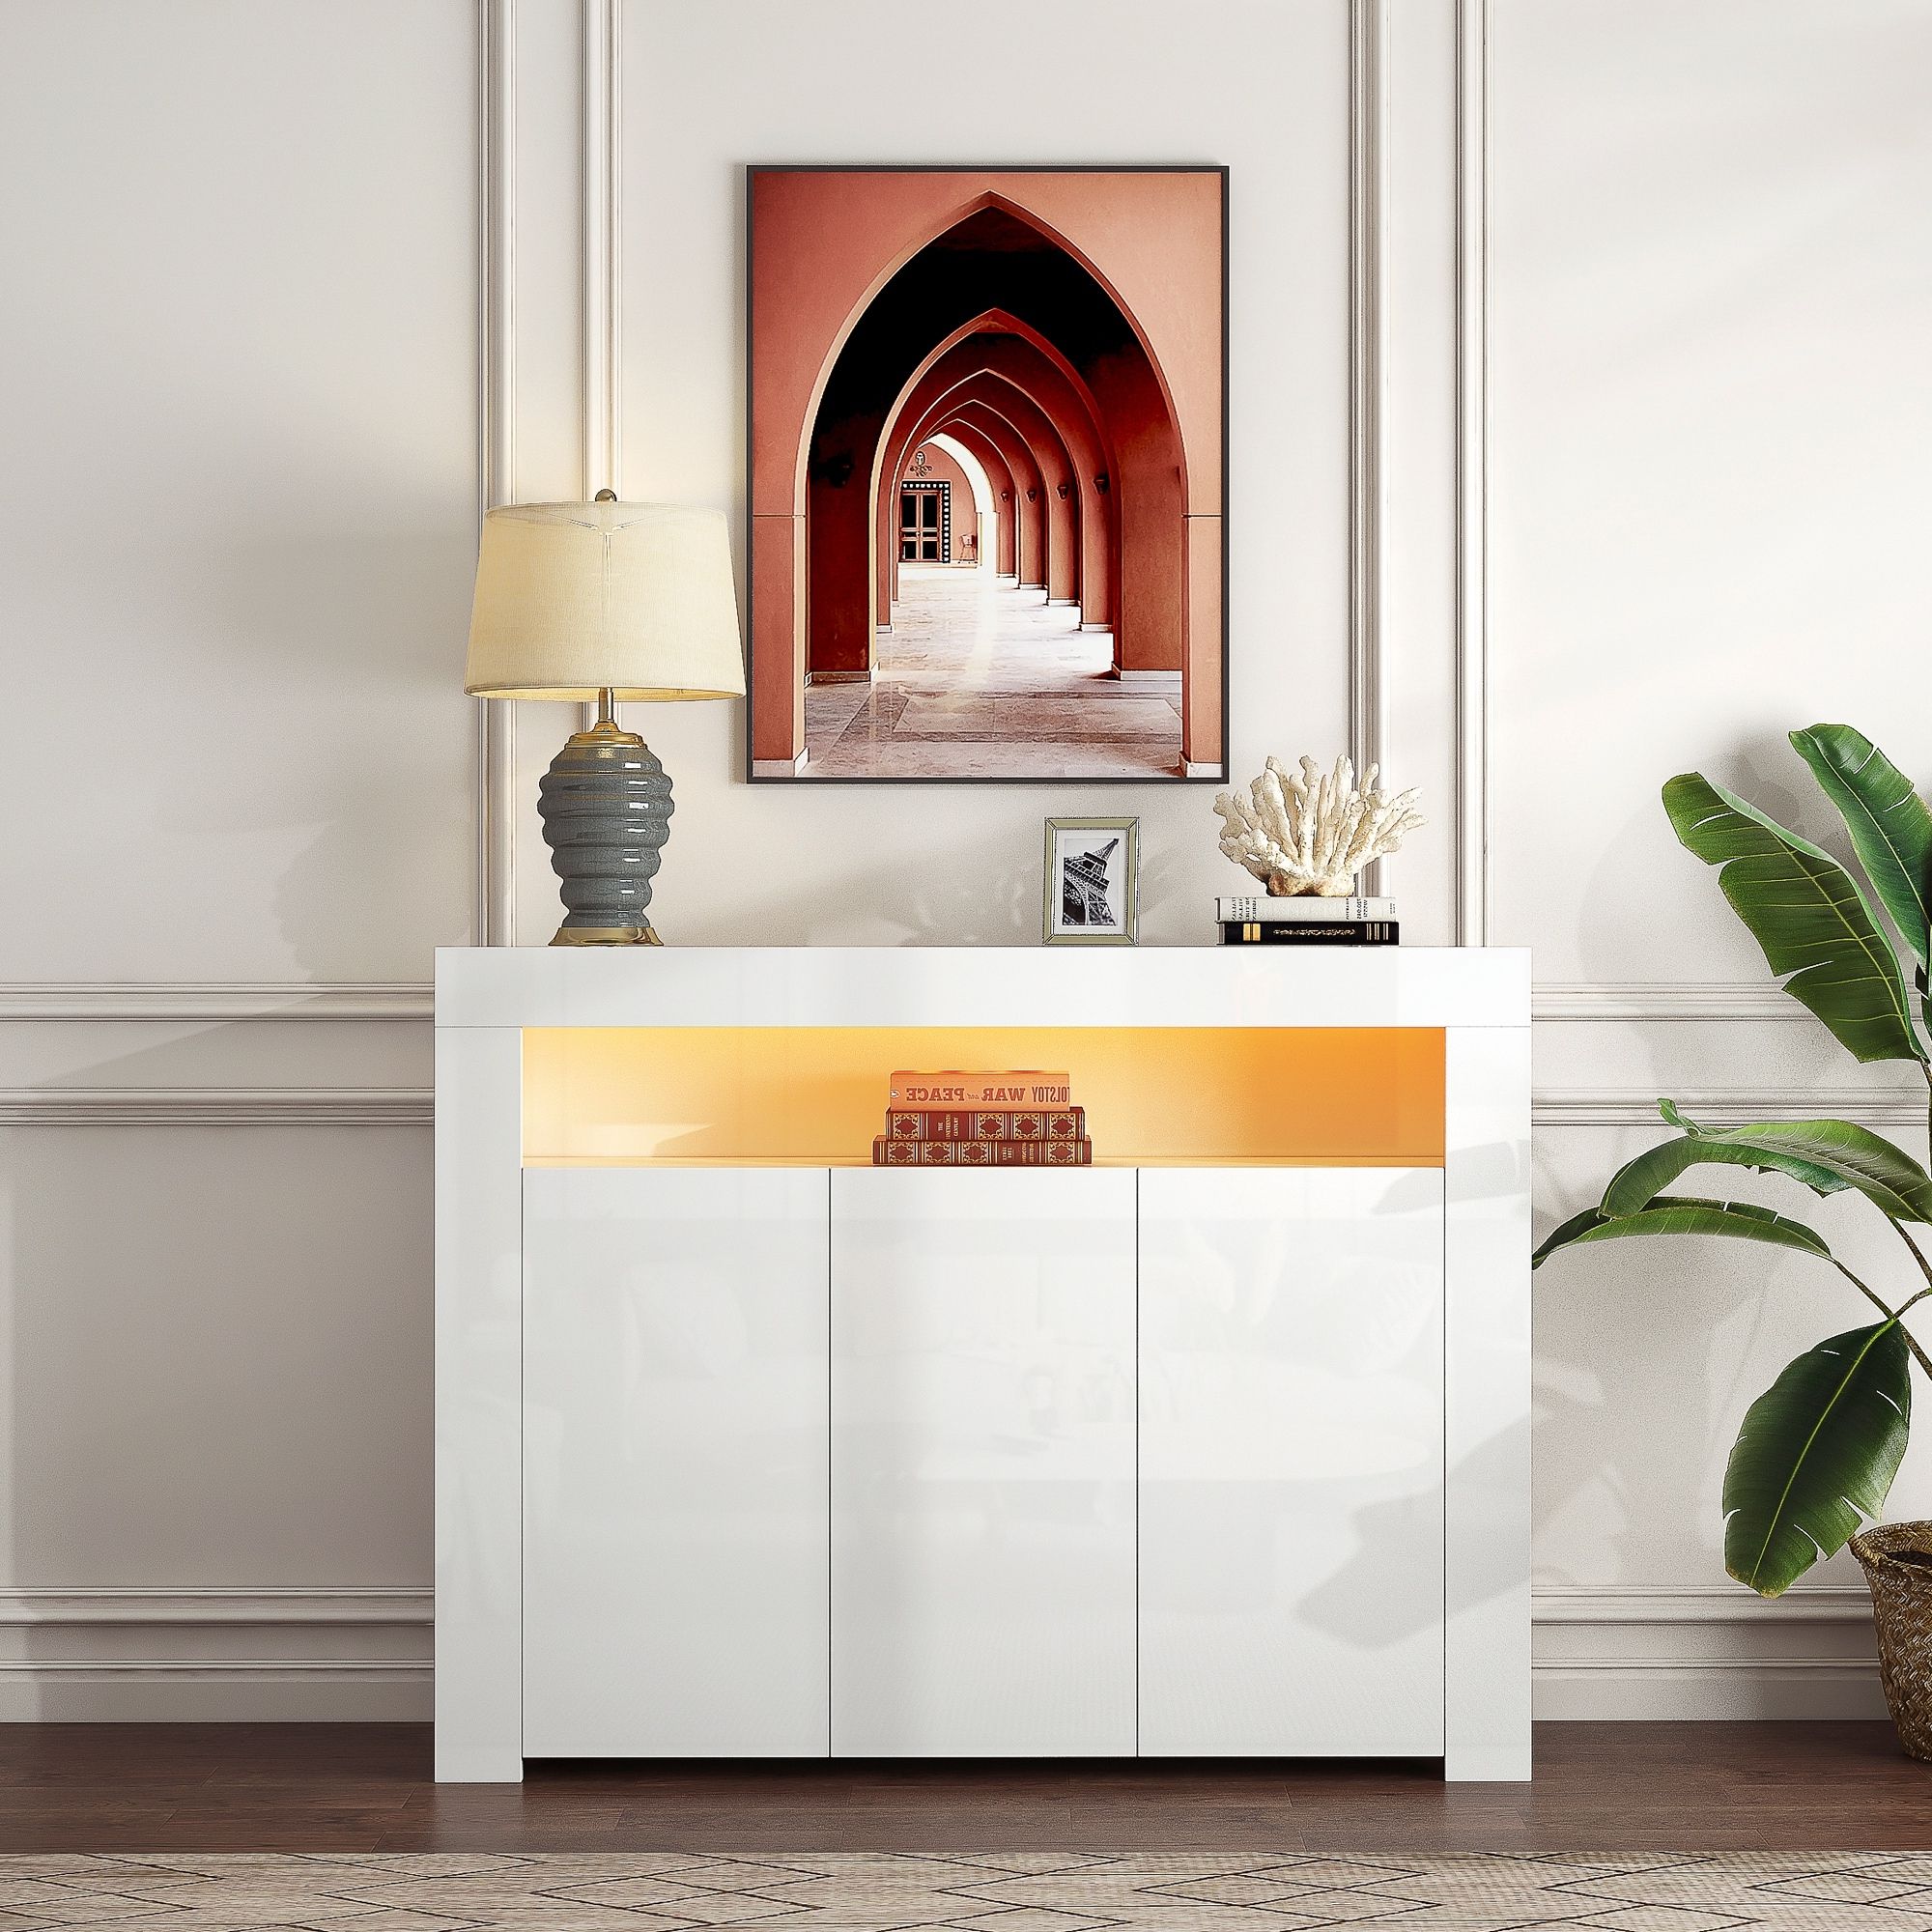 Most Recent Living Room Sideboard Storage Cabinet With Led Light, Modern Kitchen Unit Cupboard  Buffet Wooden Storage With 3 Doors – Bed Bath & Beyond – 36976758 Regarding 3 Doors Sideboards Storage Cabinet (View 10 of 10)